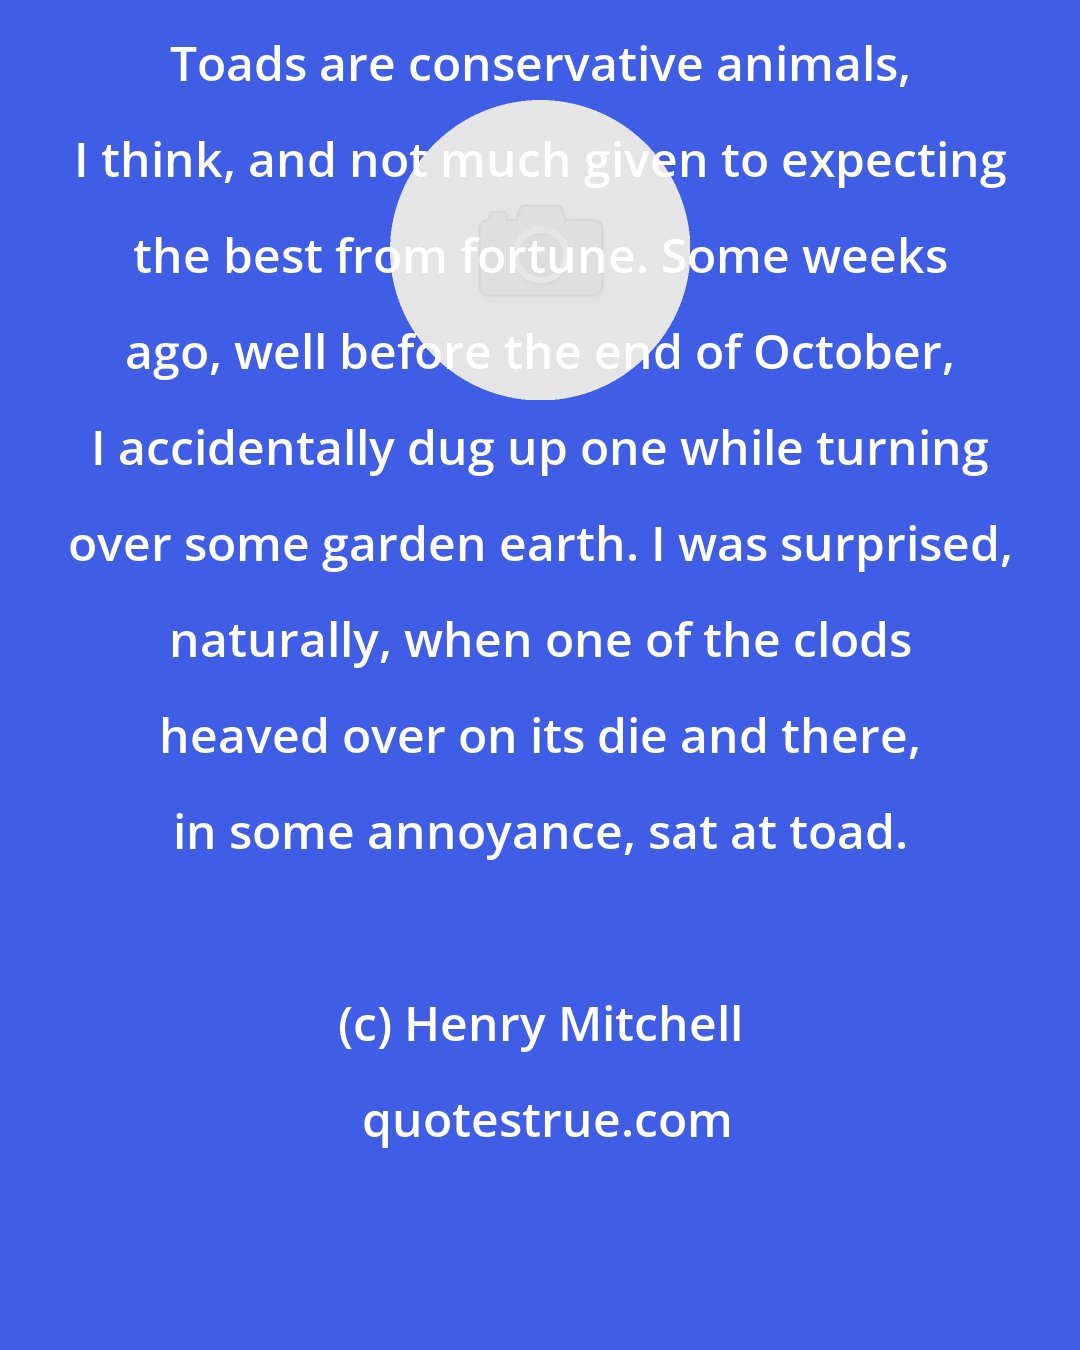 Henry Mitchell: Toads are conservative animals, I think, and not much given to expecting the best from fortune. Some weeks ago, well before the end of October, I accidentally dug up one while turning over some garden earth. I was surprised, naturally, when one of the clods heaved over on its die and there, in some annoyance, sat at toad.